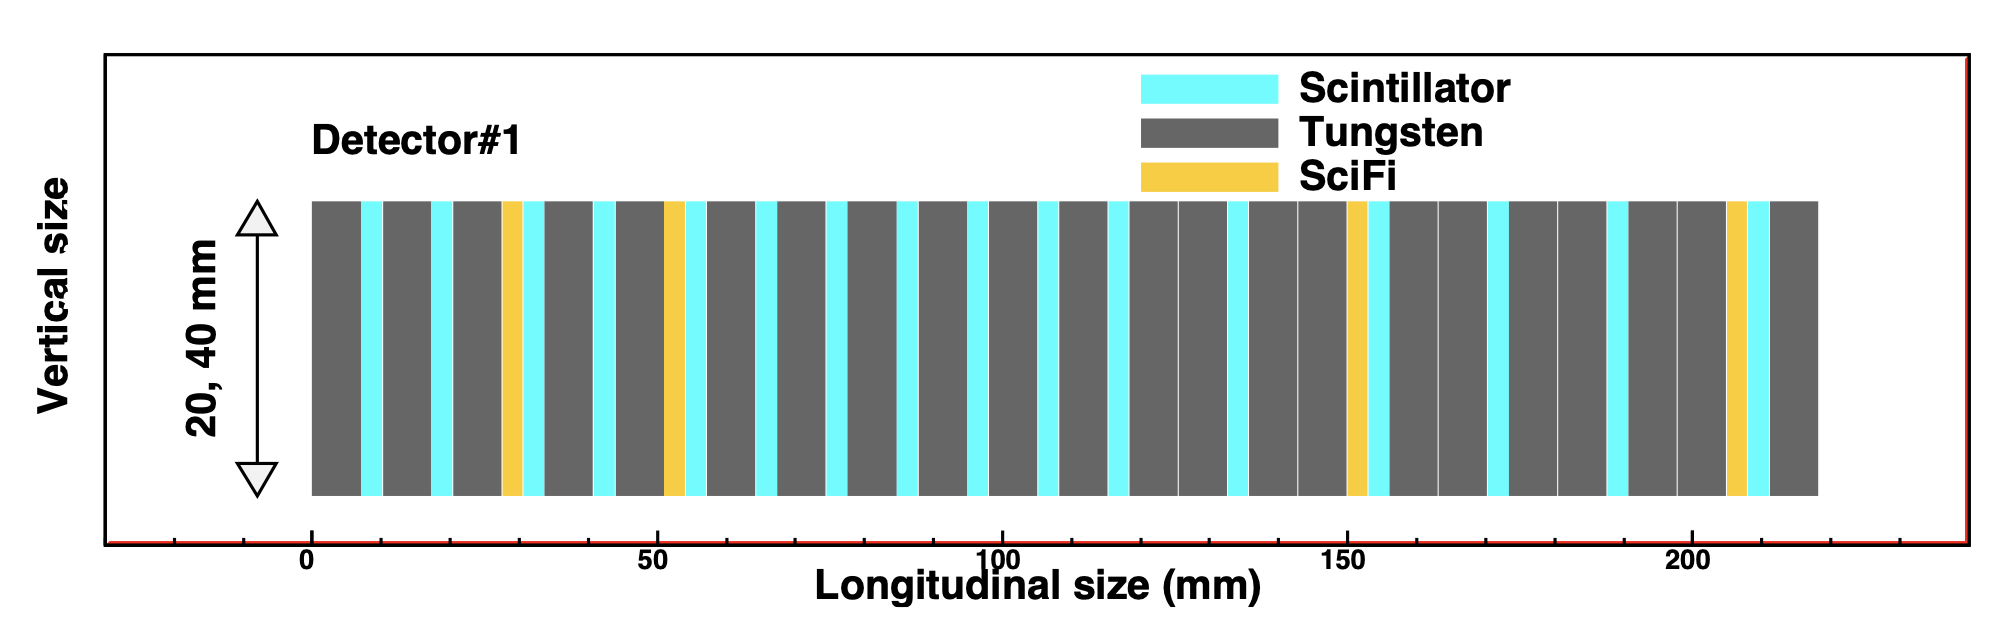 ../_images/Longitudinal_structure_of_ZDC_detector.png